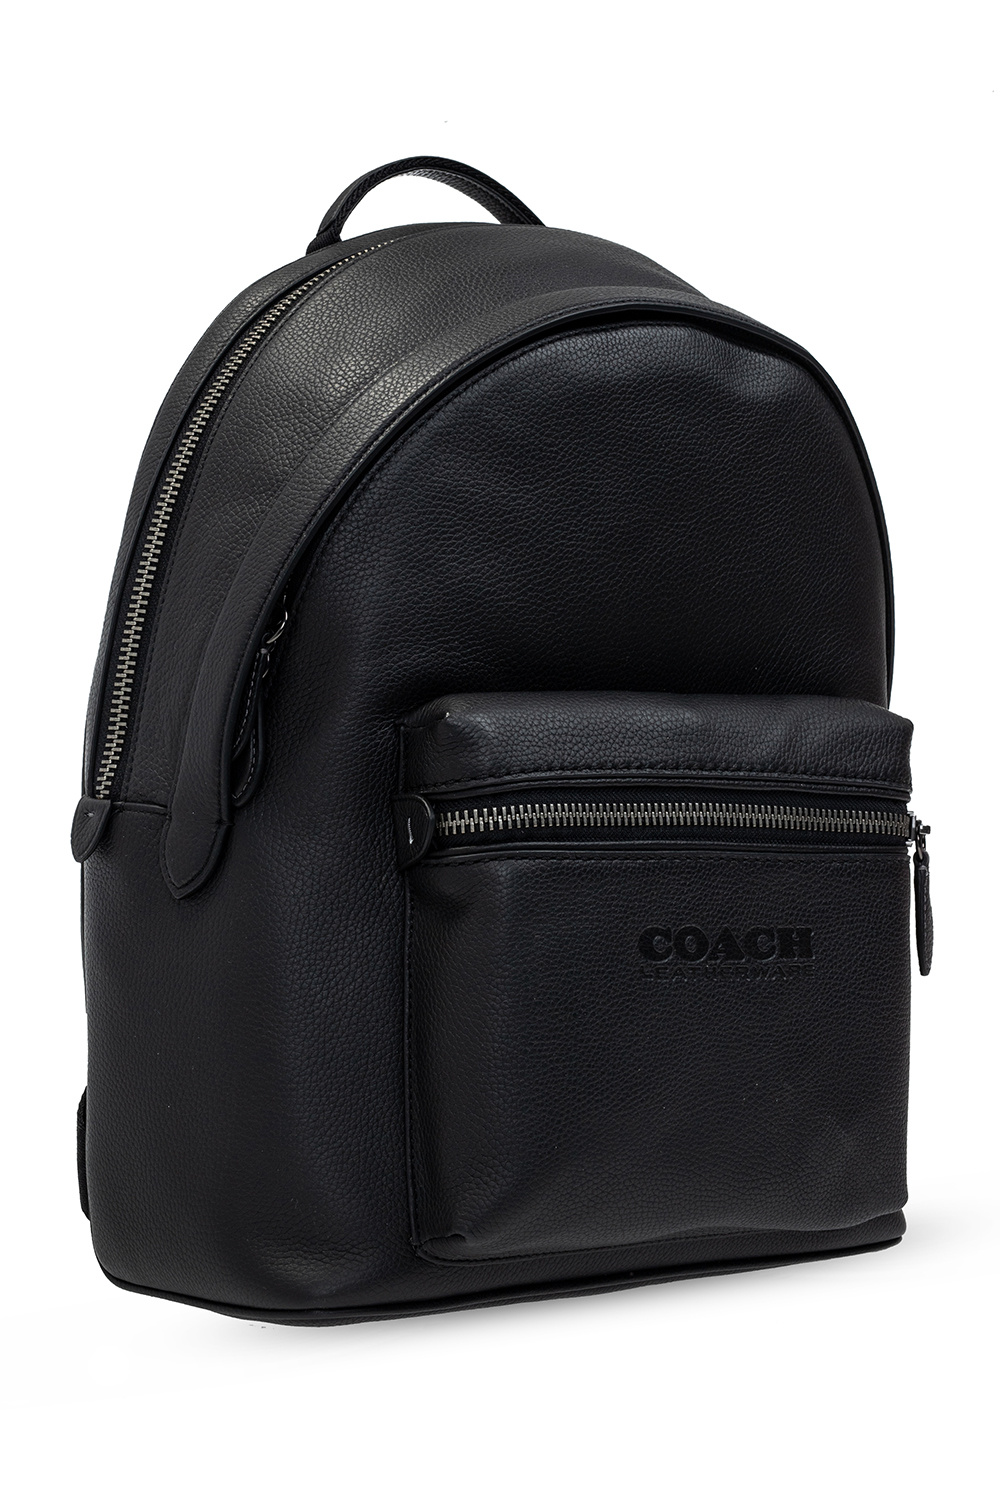 Coach 'Charter' Aboutpack with logo